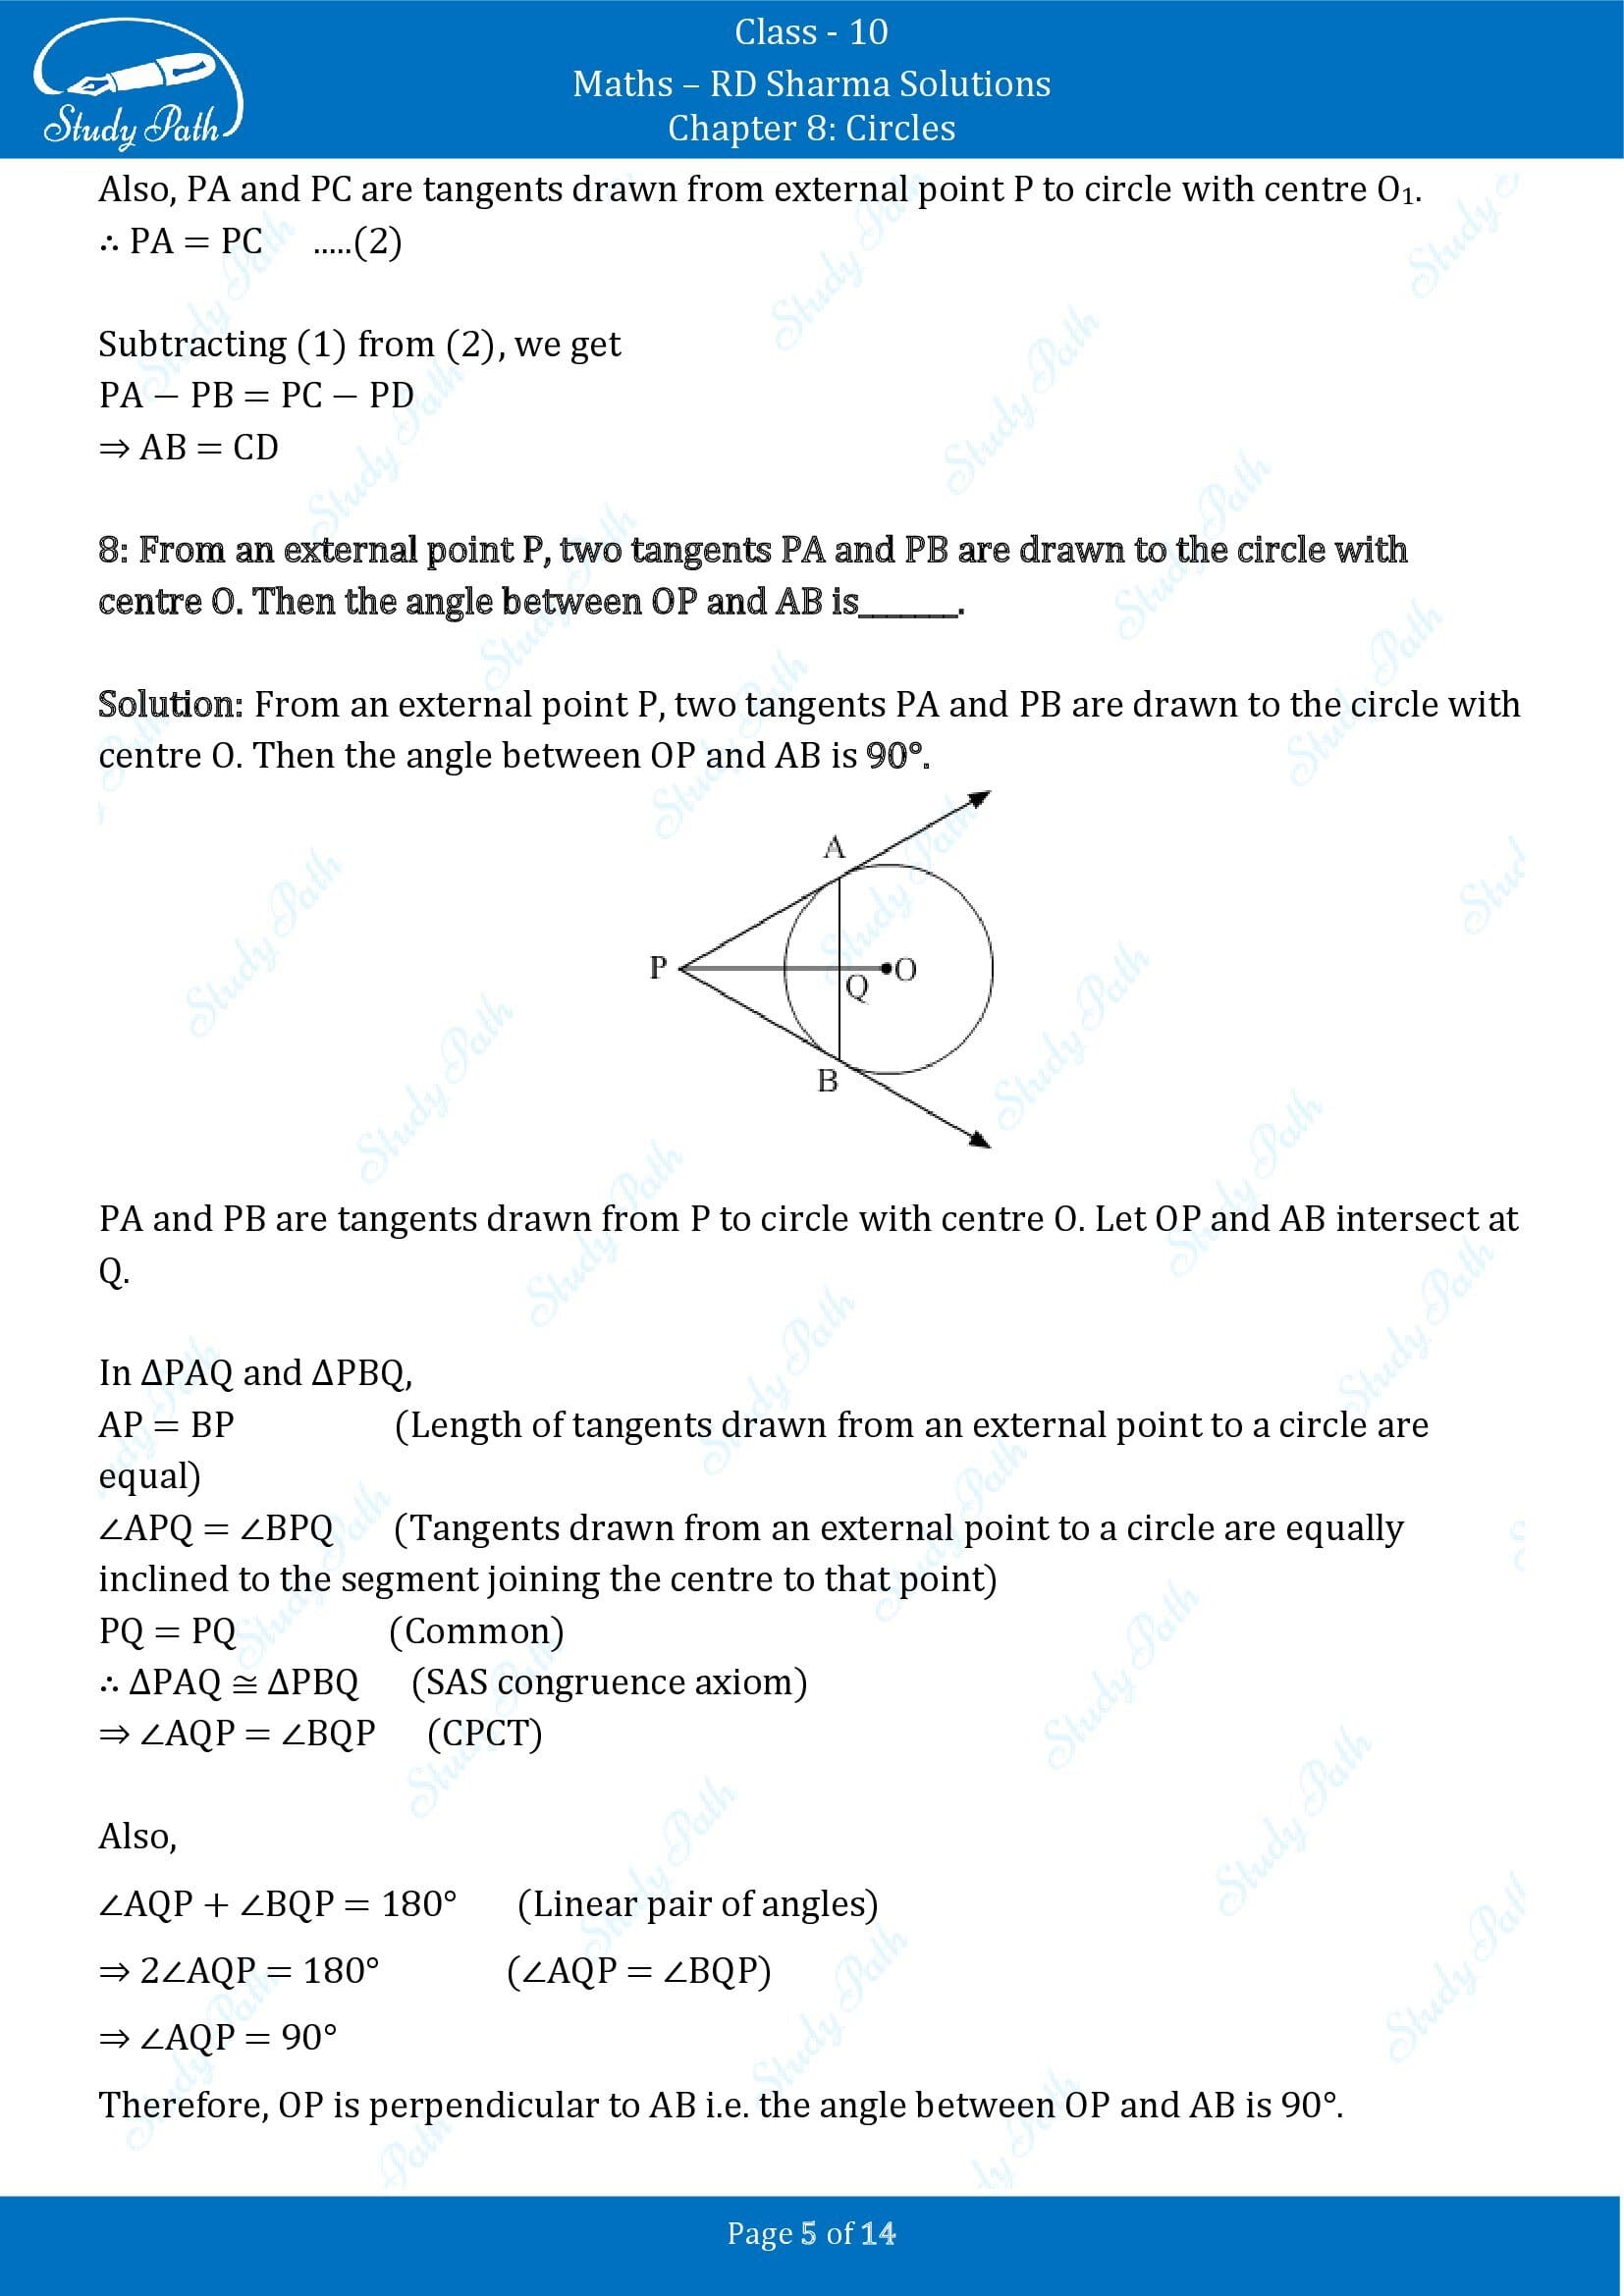 RD Sharma Solutions Class 10 Chapter 8 Circles Fill in the Blank Type Questions FBQs 00005